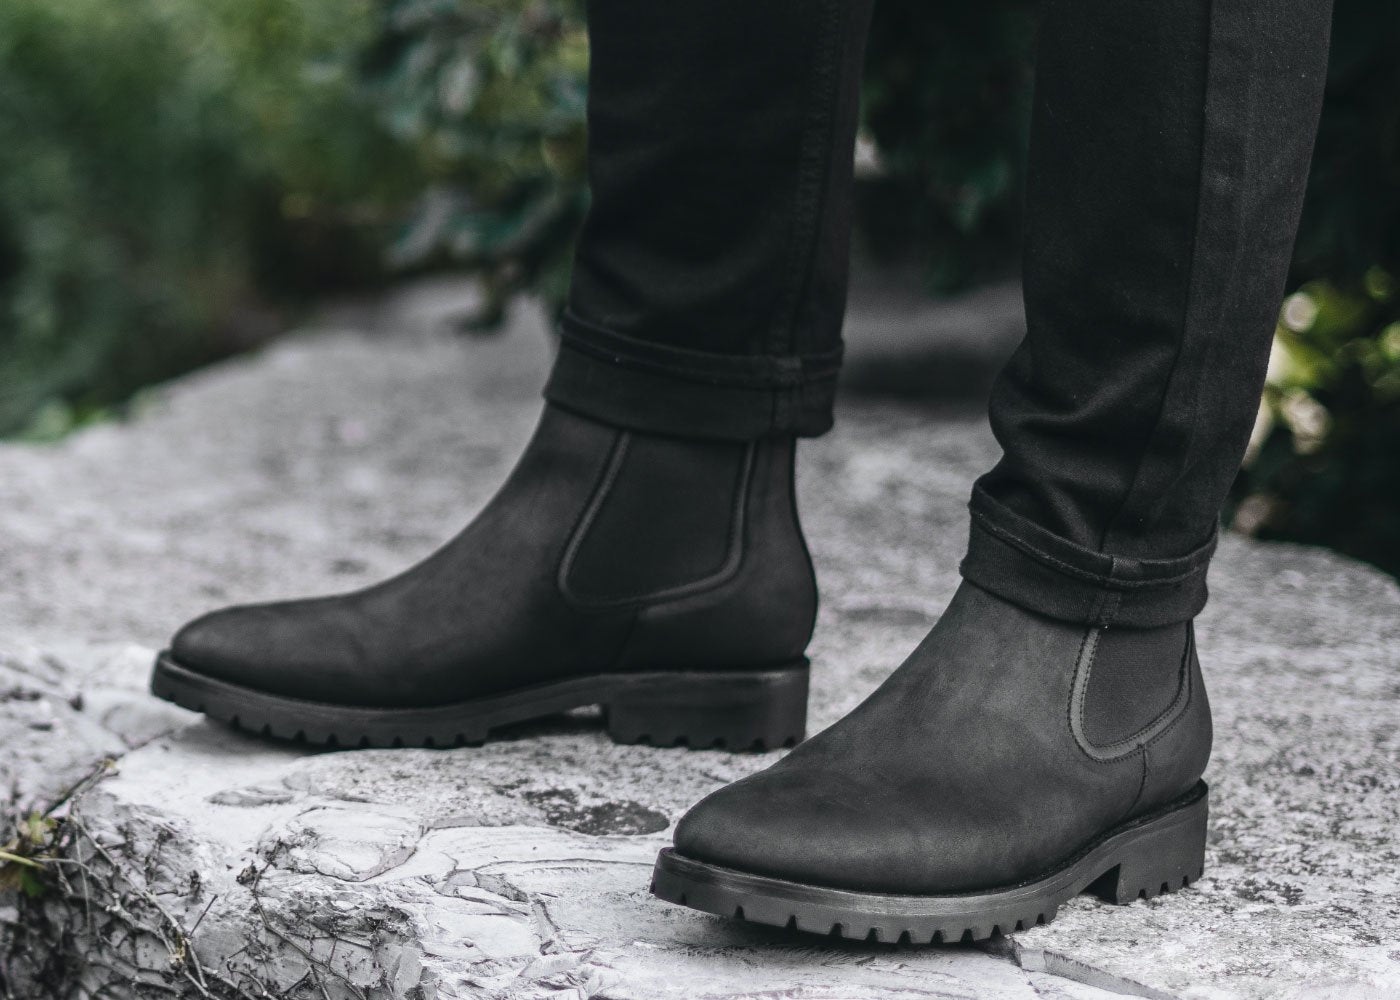 Men's Legend Chelsea Boot in Black Matte Leather by Thursday Boot Company